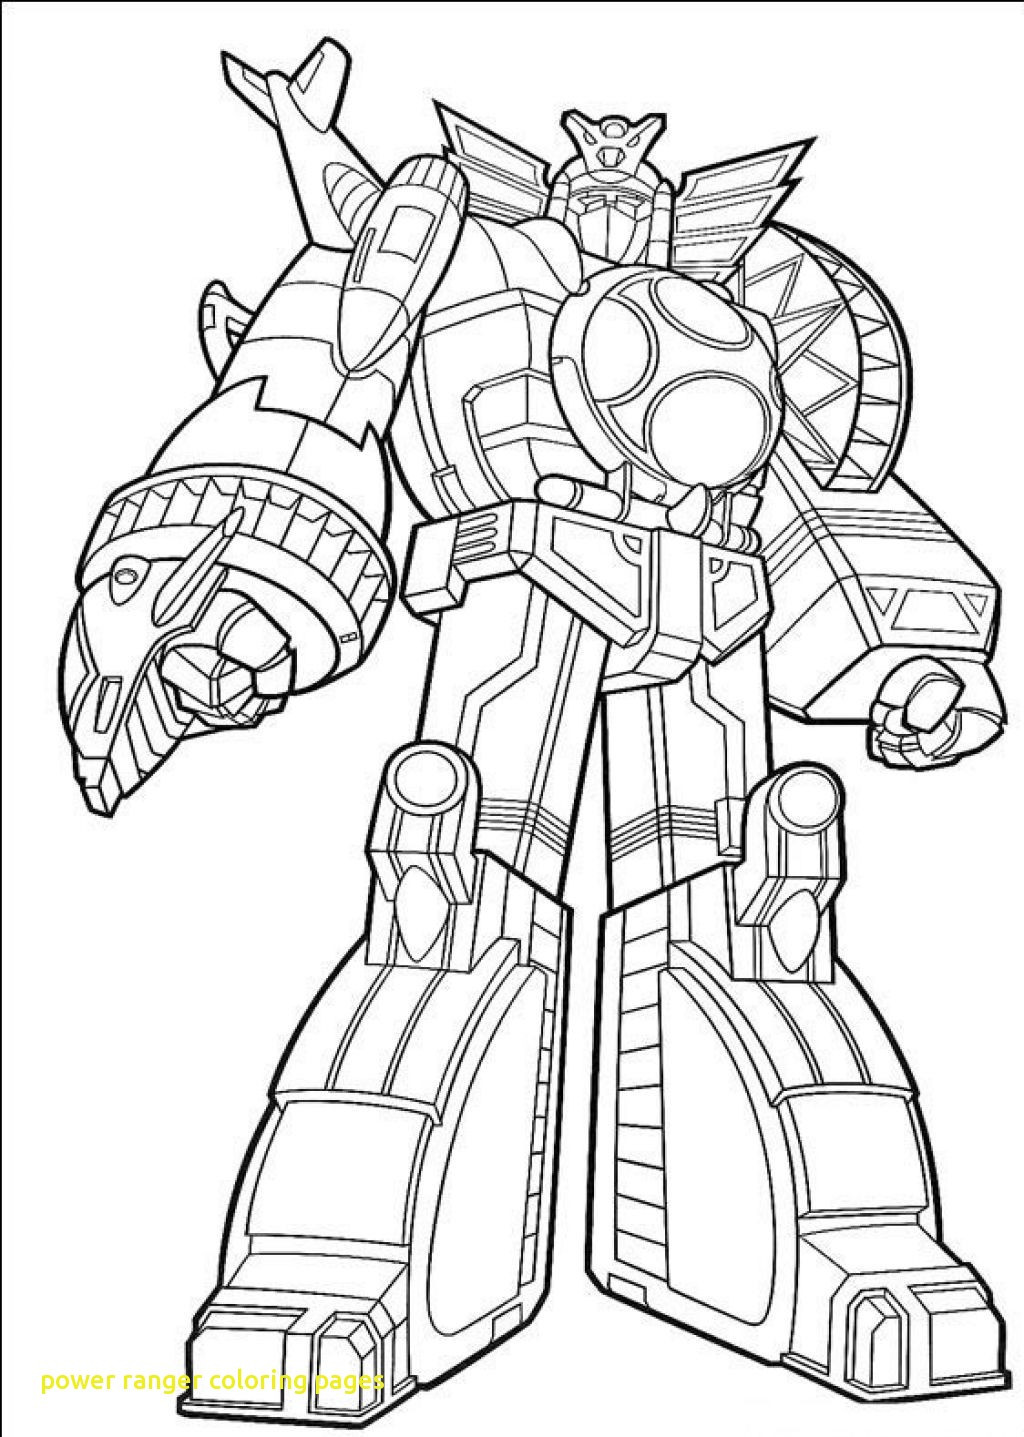 Mighty Morphin Power Rangers Coloring Pages at ...